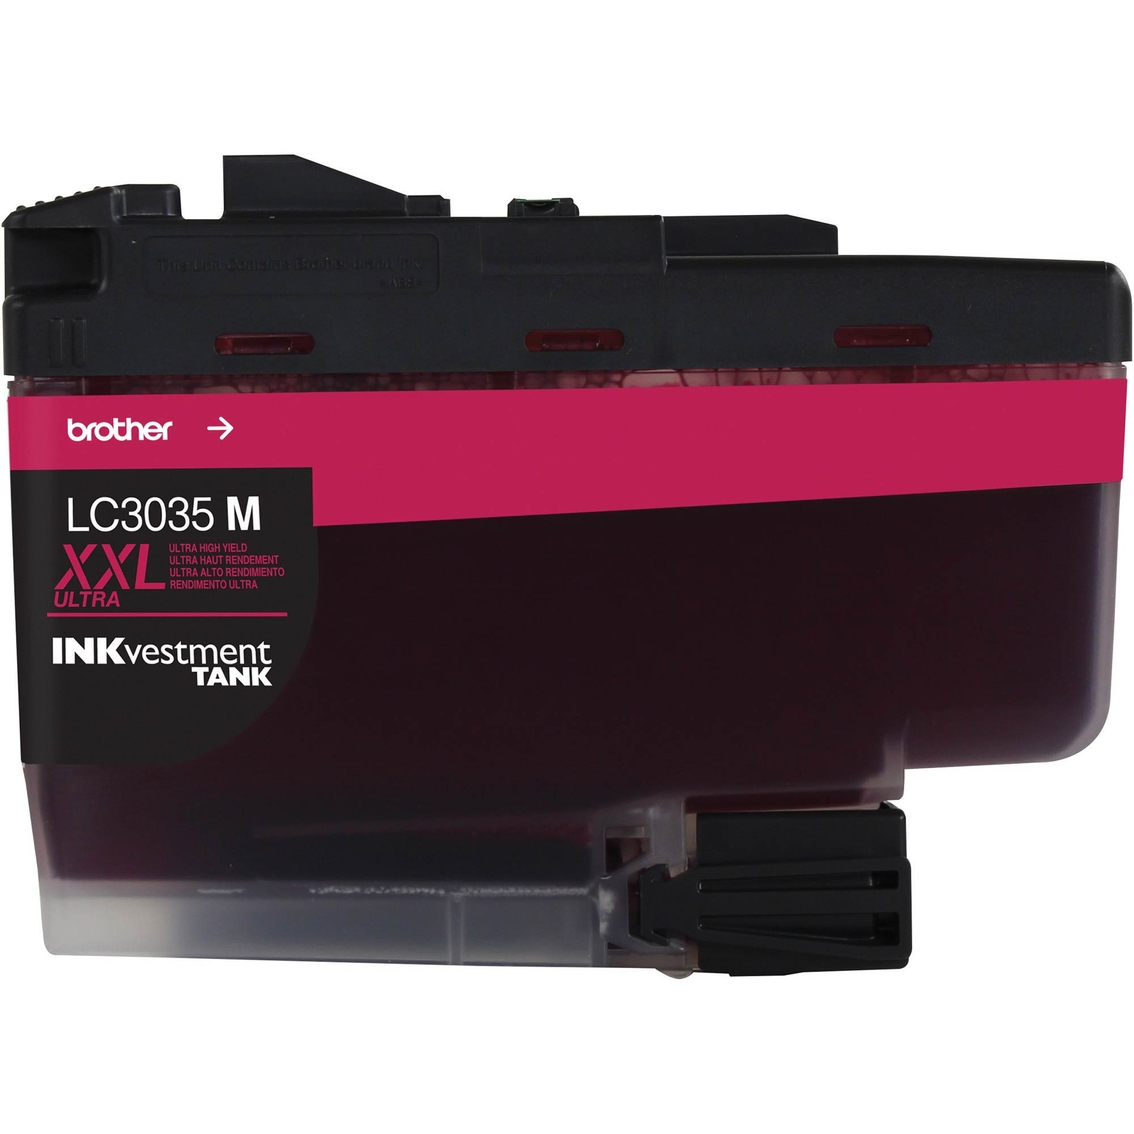 Brother INKvestment Tank Super High Yield Ink Cartridge (Magenta) - Image 2 of 2